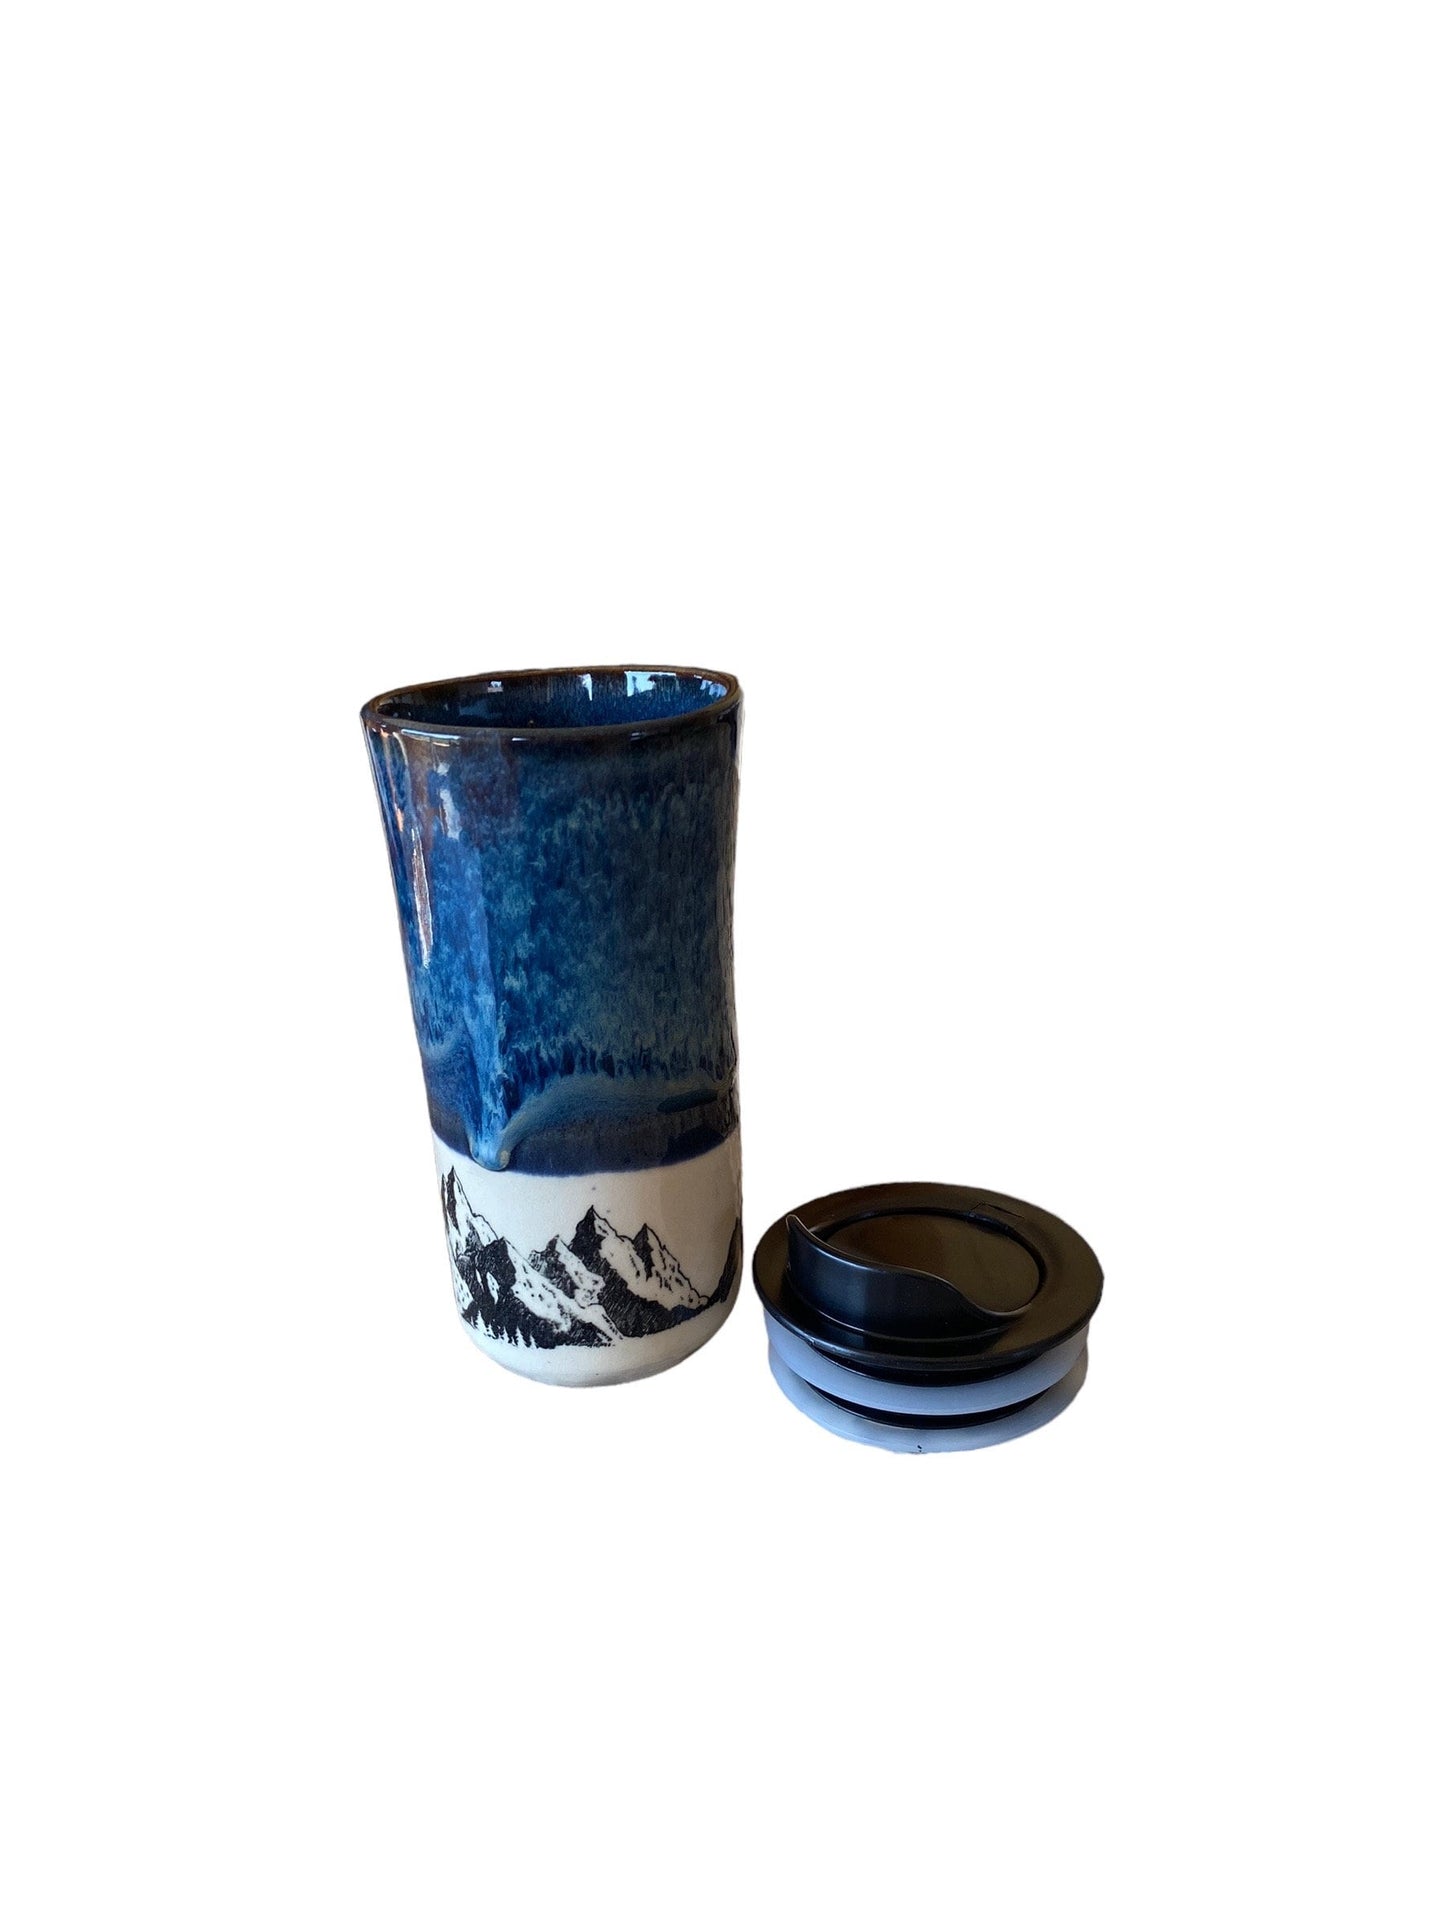 Large Travel Mug with Locking Lid Embellished with Mountains - Stylish and Secure Pottery for Nature-Loving Adventures